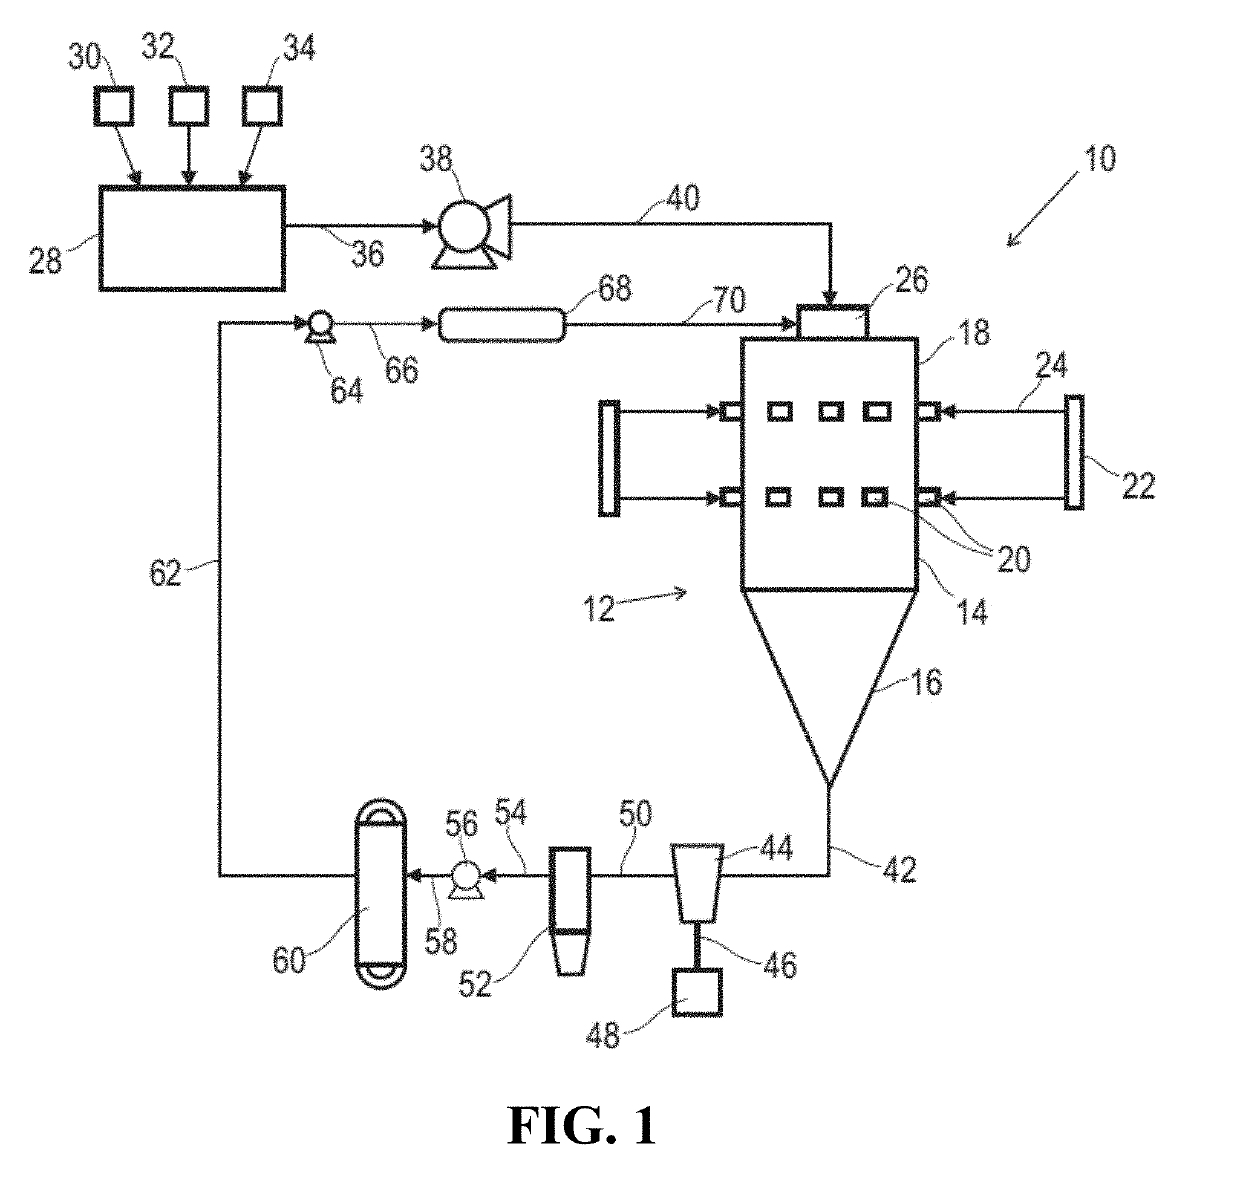 Ultrahigh efficiency spray drying apparatus and process